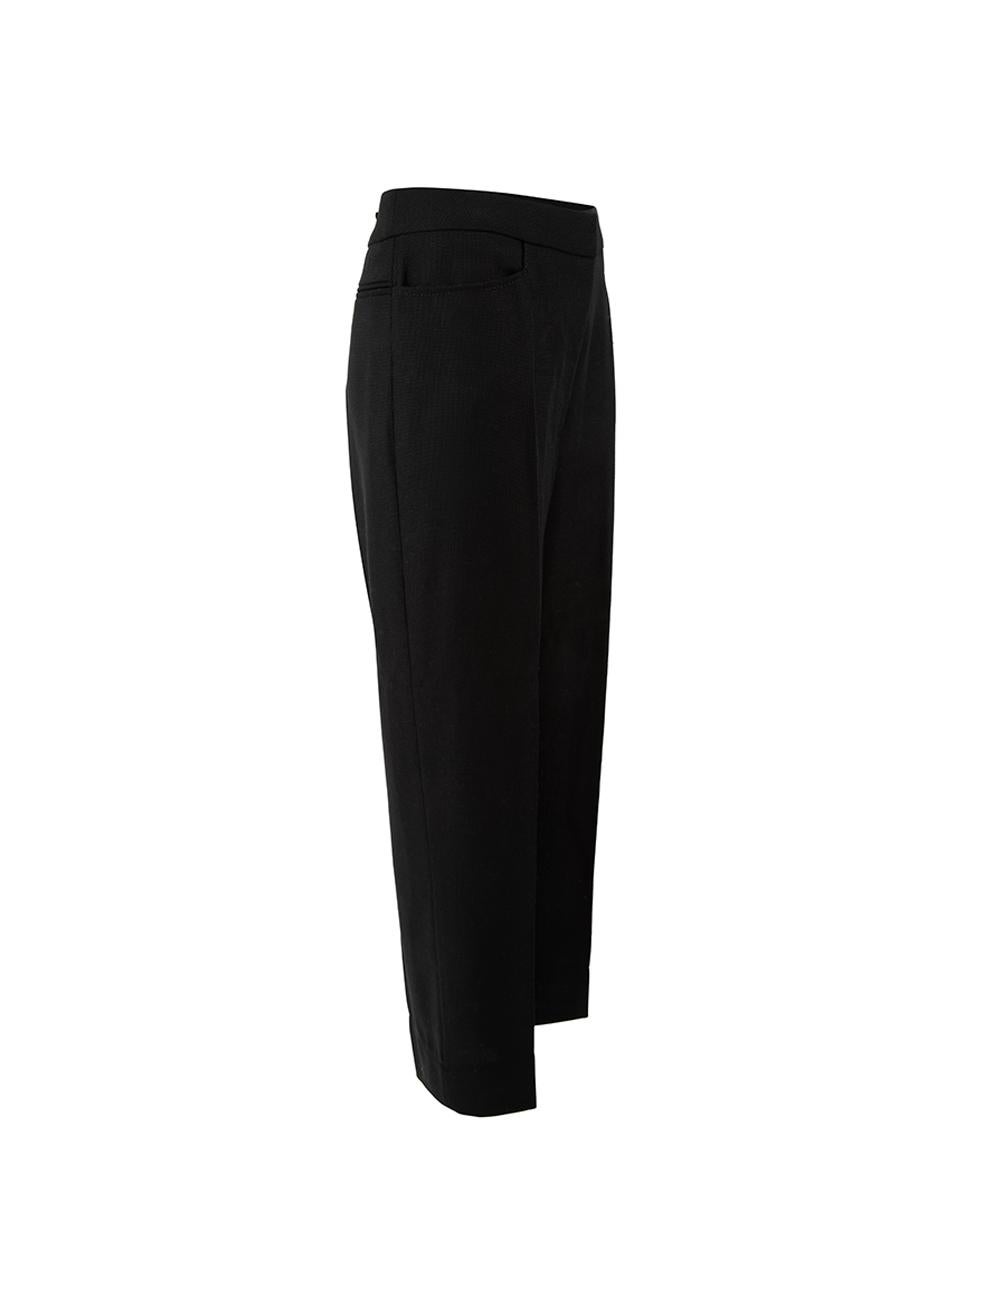 CONDITION is Very good. Hardly any visible wear to trousers is evident on this used Jacquemus designer resale item. Details Black Wool Straight leg trousers High rise Front zip closure with clasps and button Front side pockets Back welt pockets Made